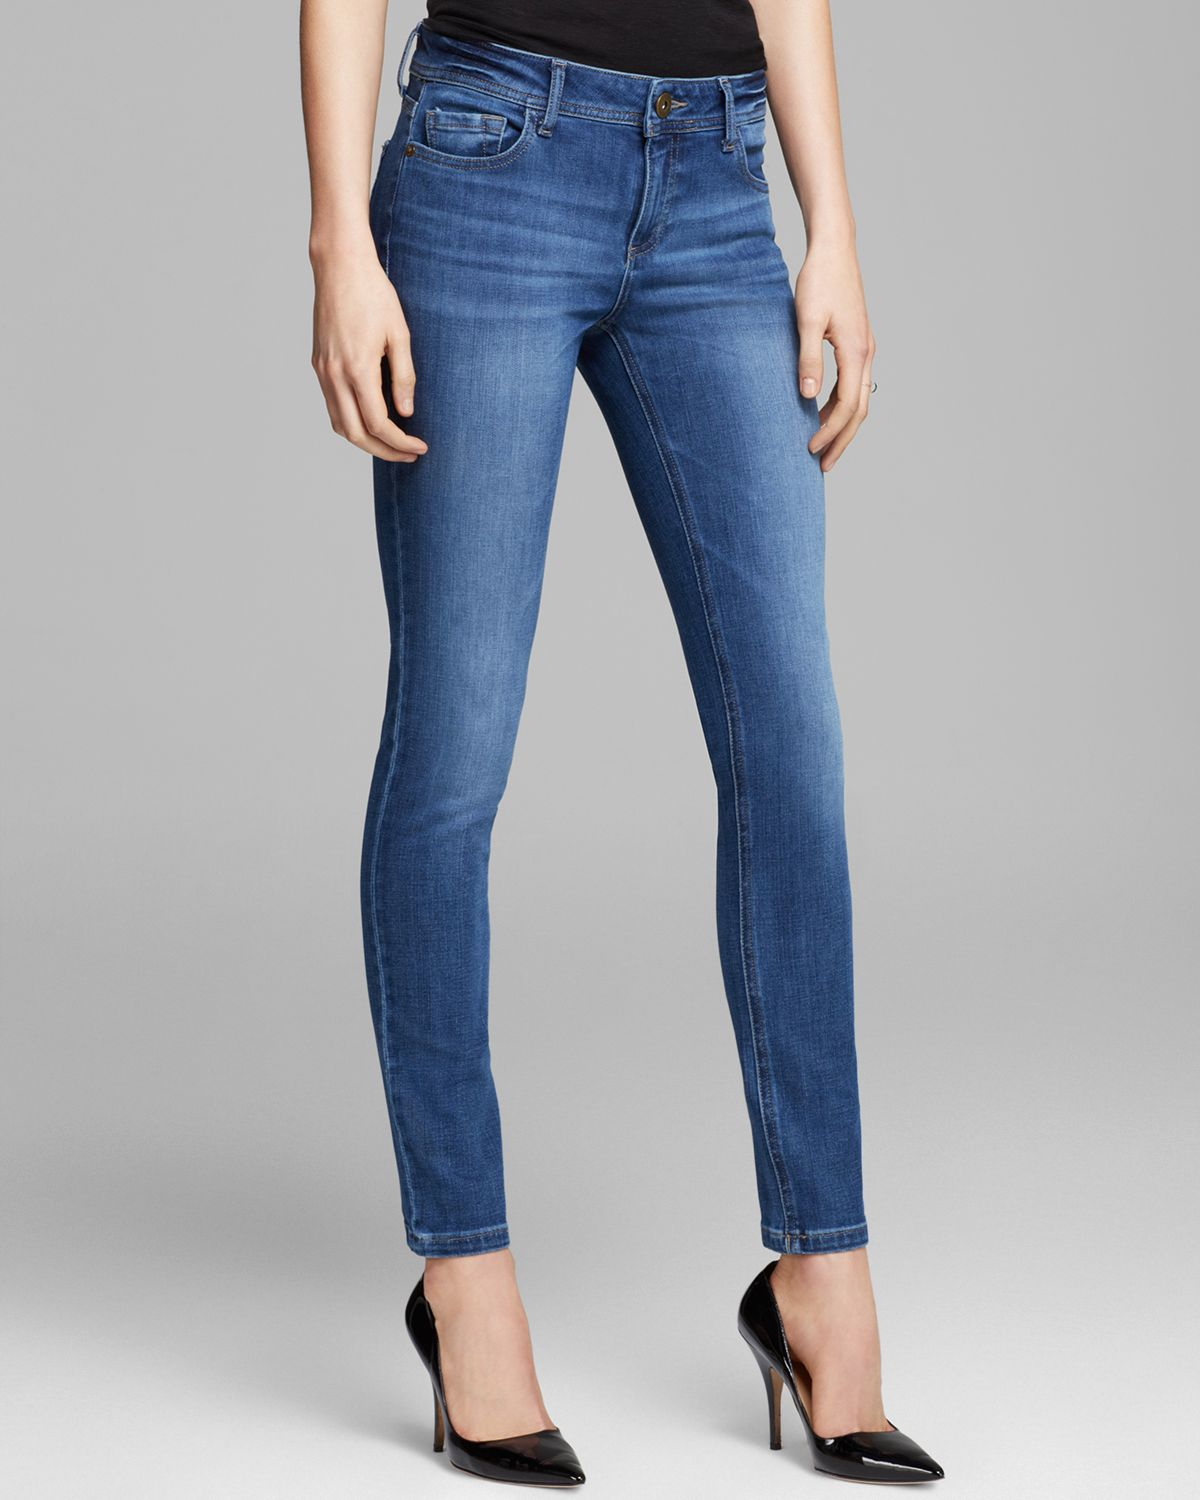 Dl1961 Jeans Florence Instasculpt Skinny in Pacific in Blue (Pacific